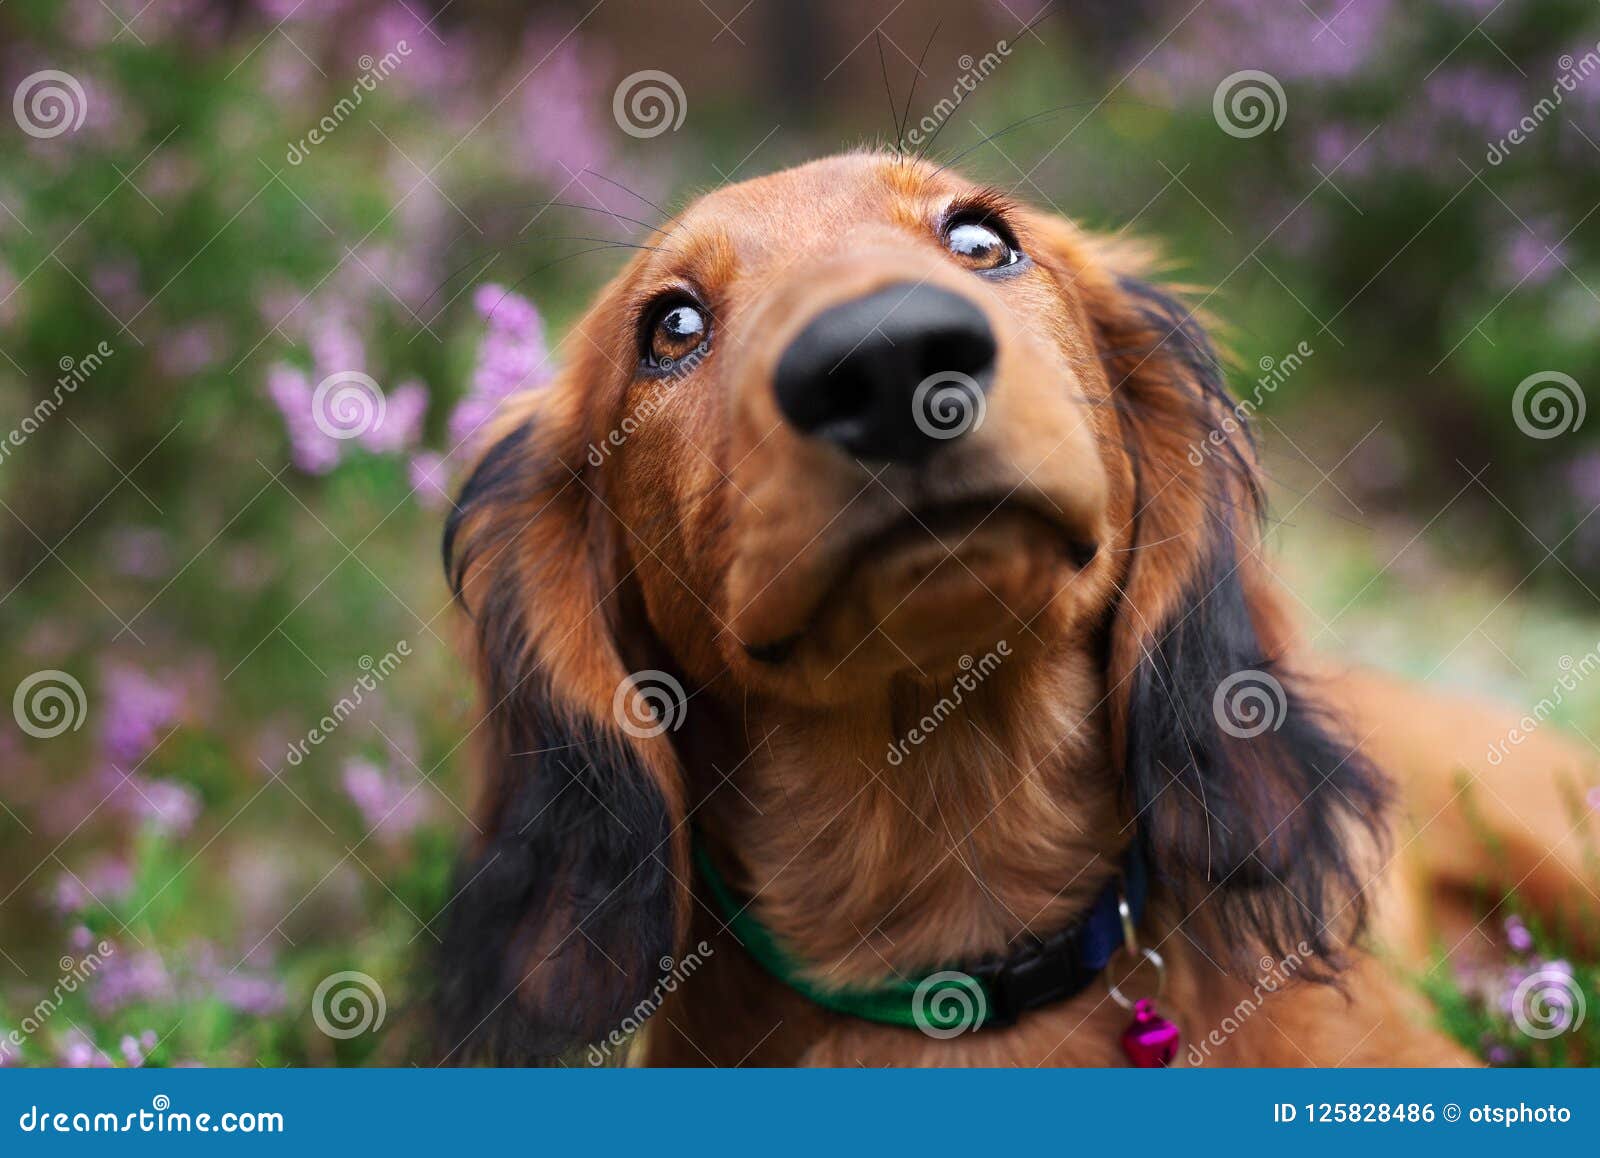 Long Haired Dachshund Puppy Portrait Close Up Stock Photo